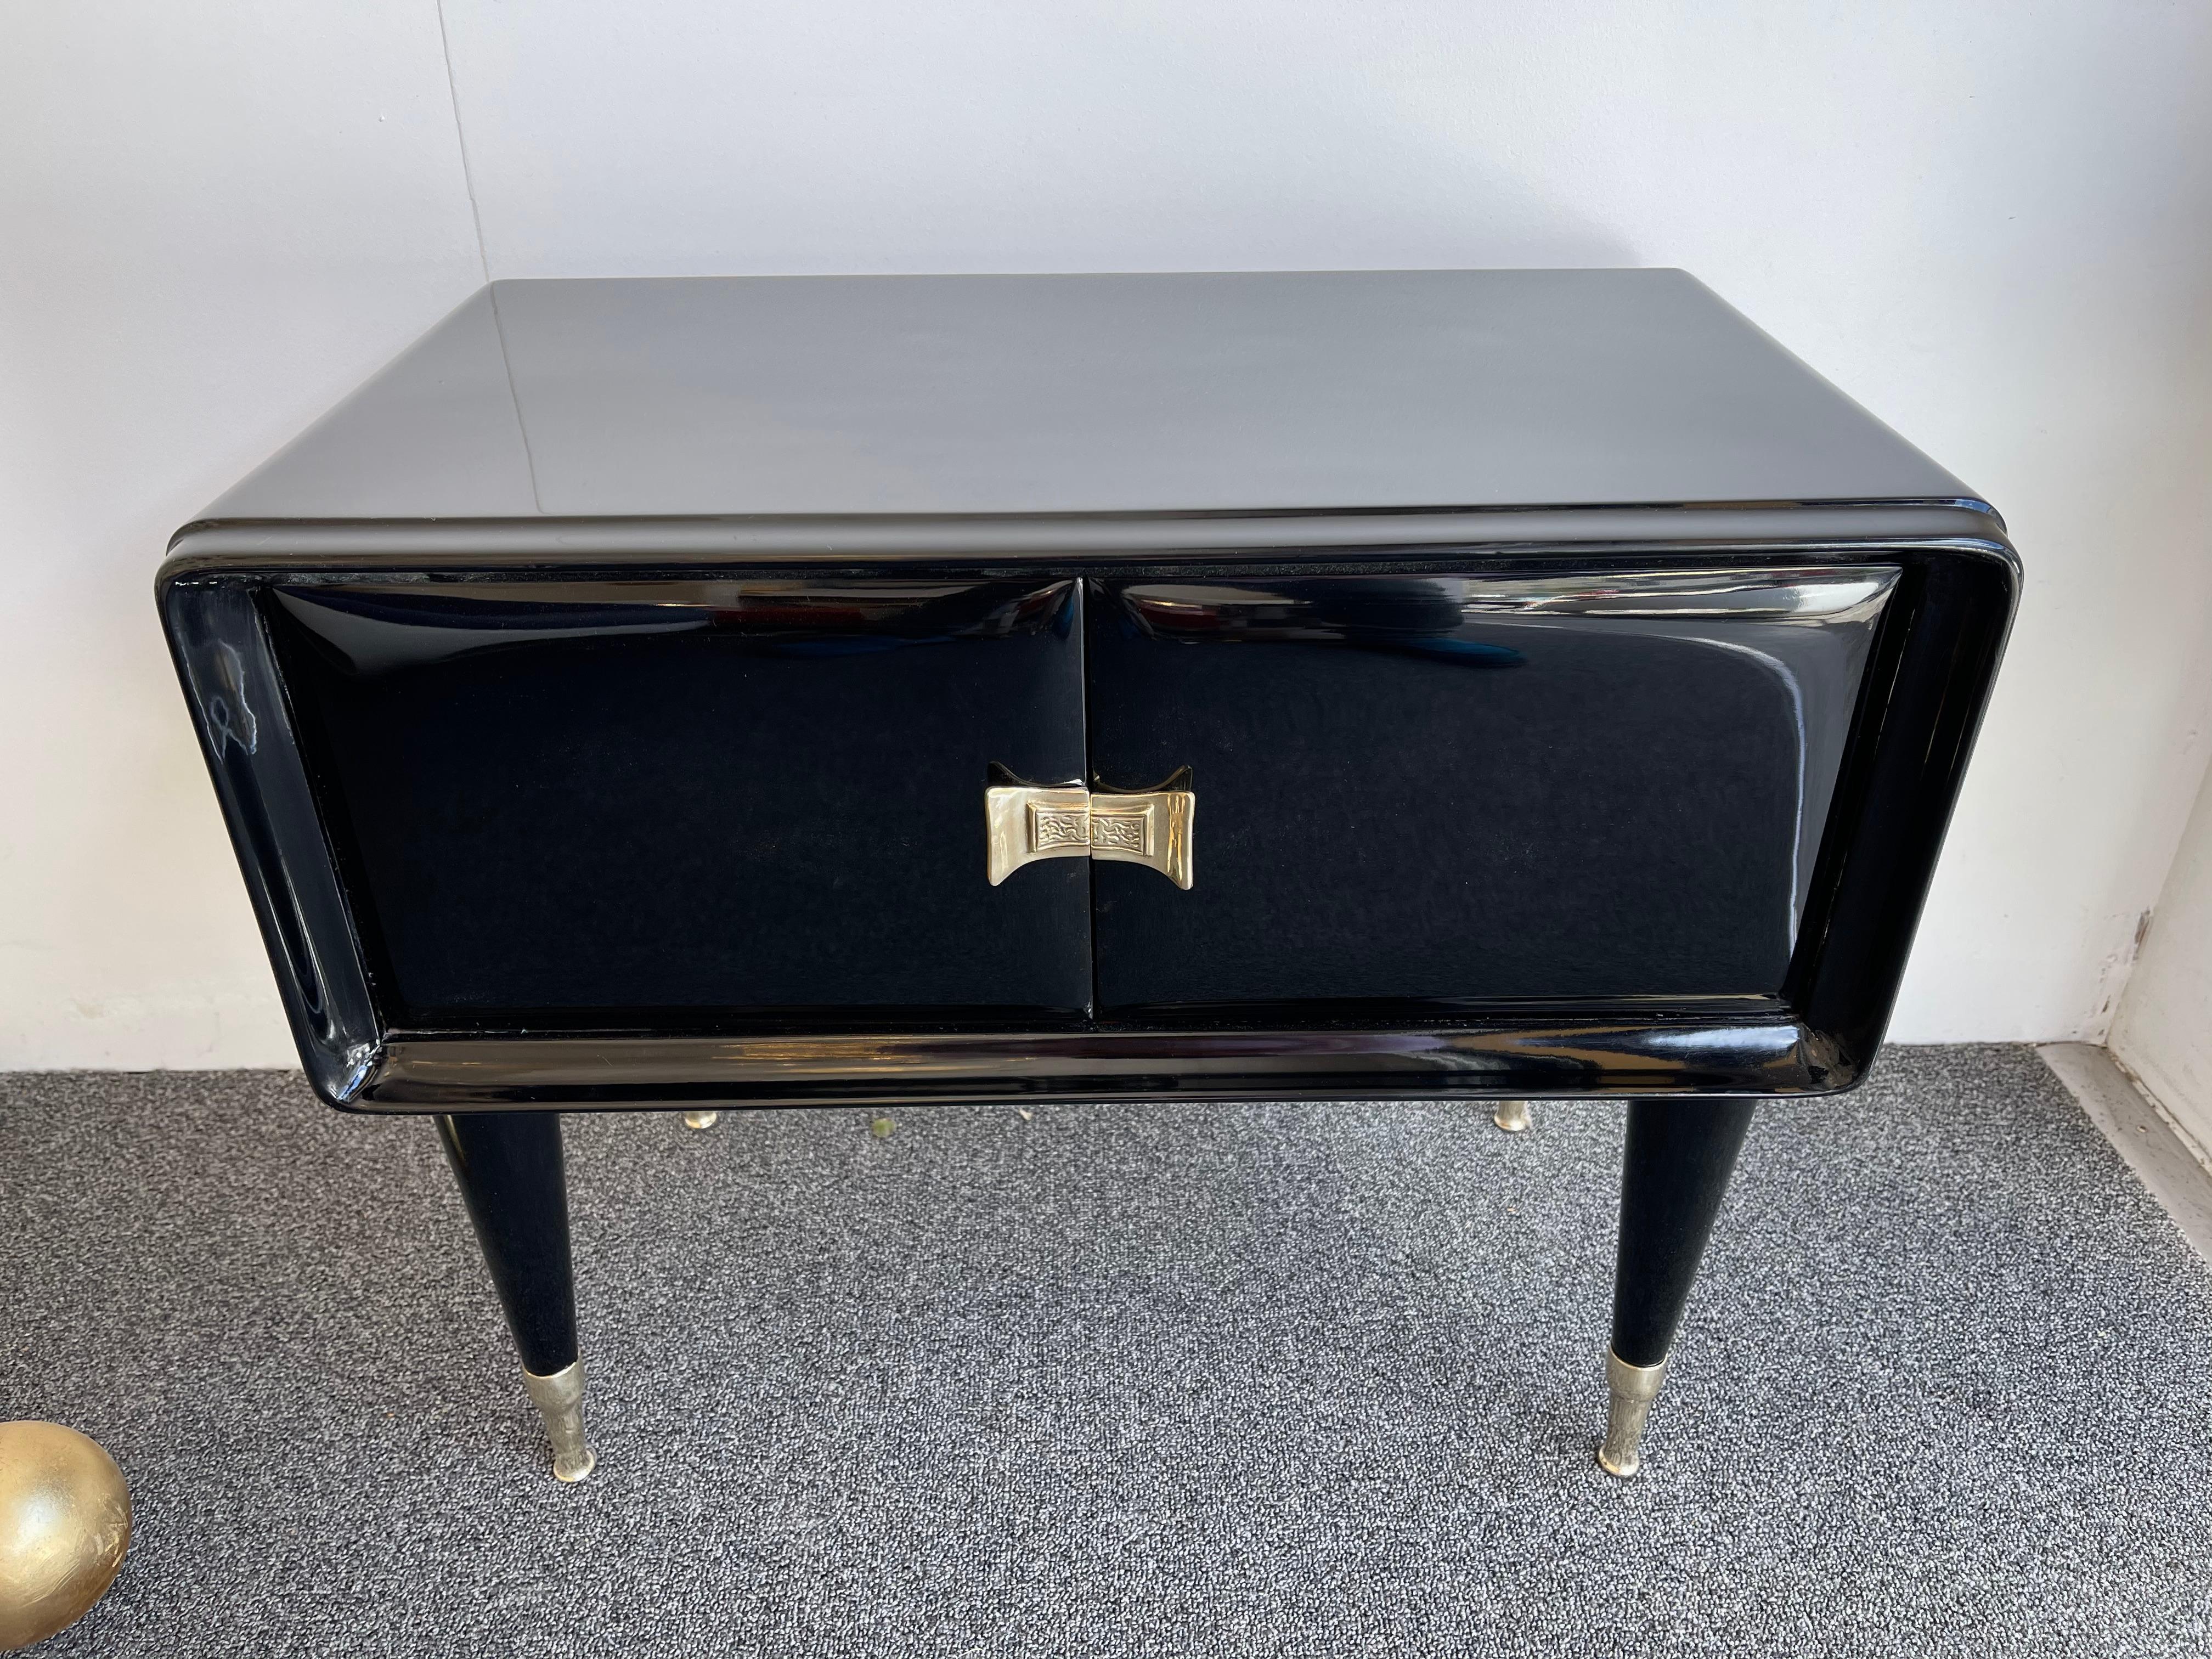 Pair of black lacquered wood nightstands, side end low tables, brass feet and handle. Also available the sideboard buffet credenza or large commode chest of drawers. Famous design like Gio Ponti, Ico Parisi.